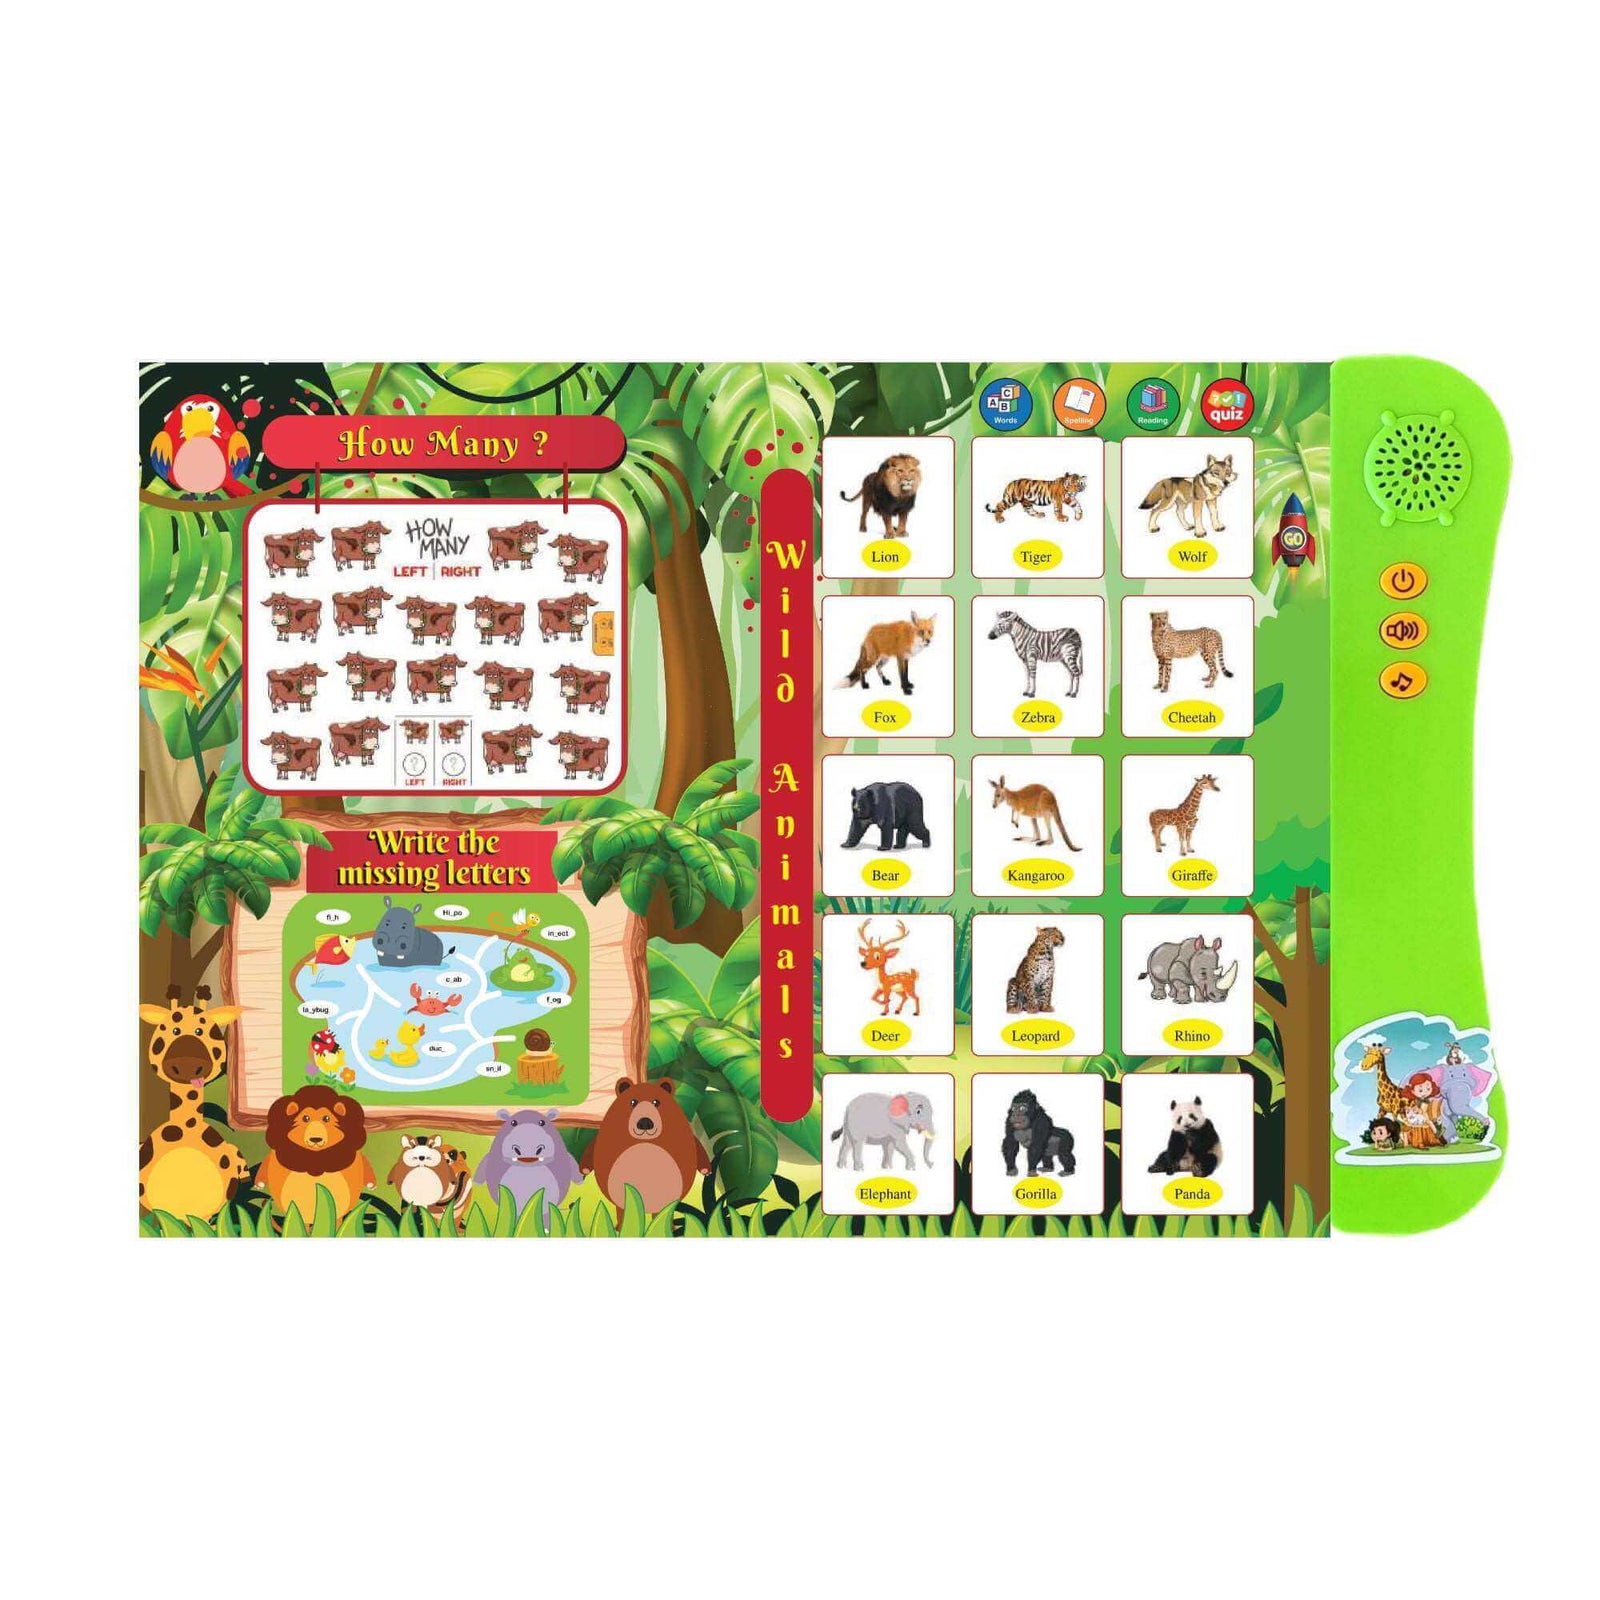 Kiddale 2-Pack My Home to Neighbourhood & Trip to Zoo Interactive Musical Sound Books